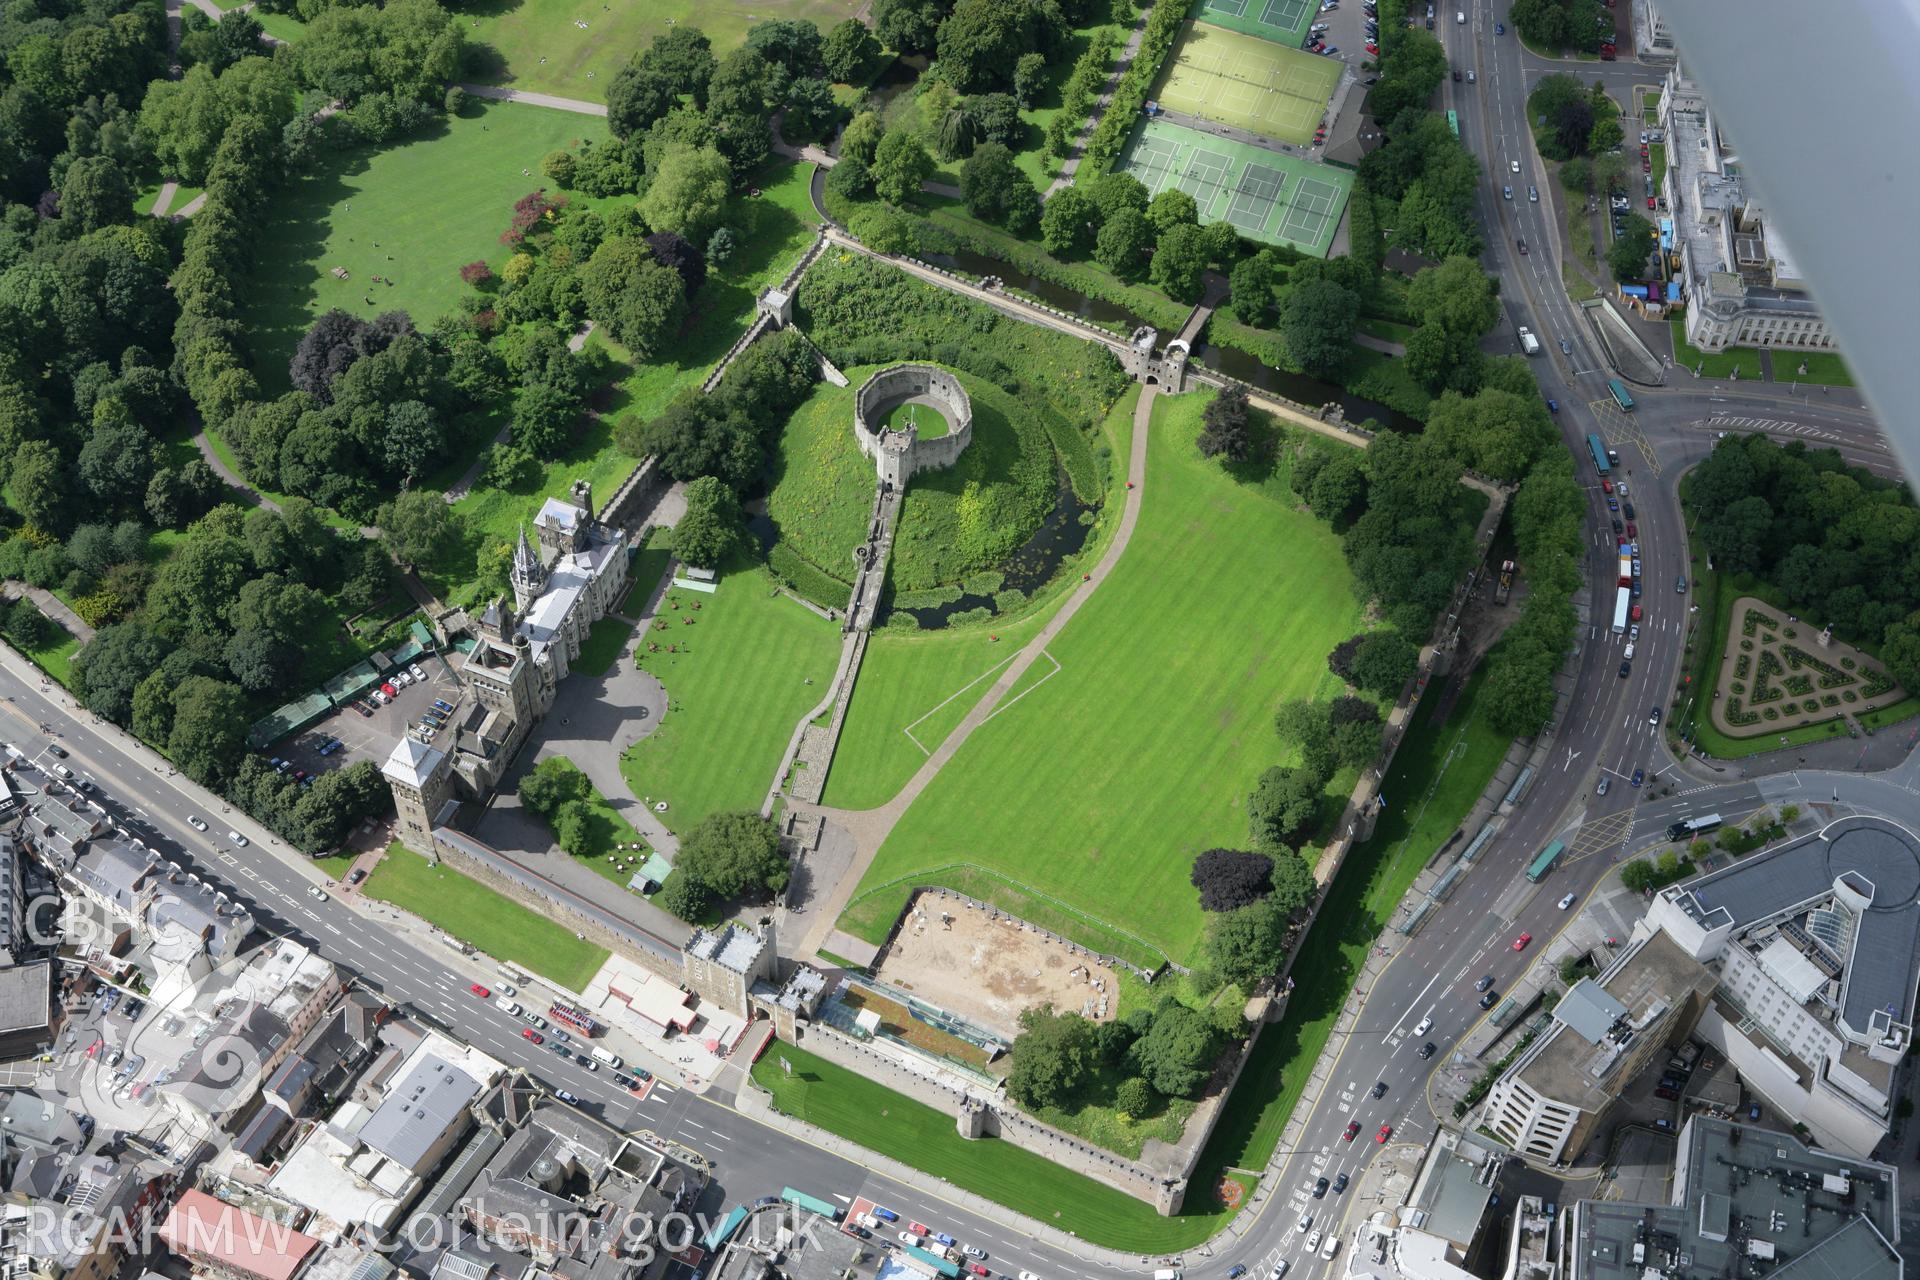 RCAHMW colour oblique aerial photograph of Cardiff Castle. Taken on 30 July 2007 by Toby Driver